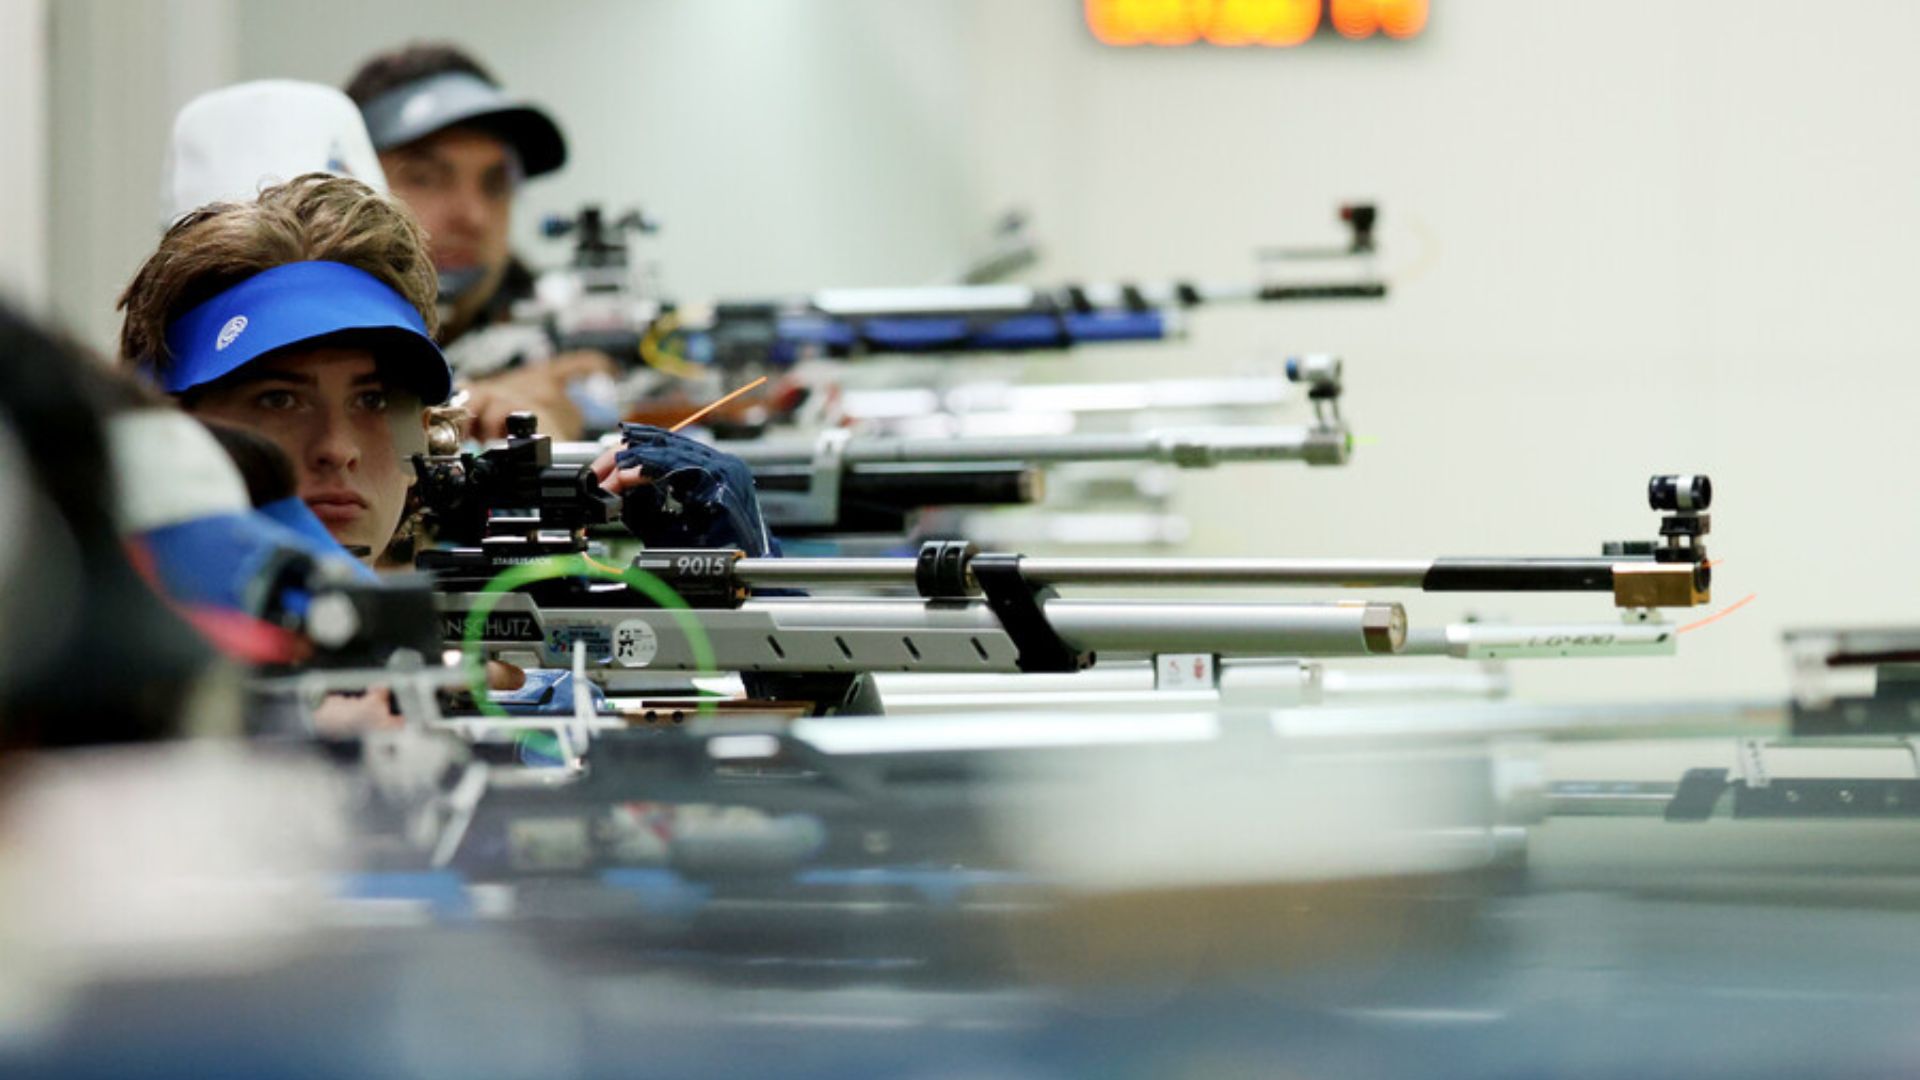 The United States won the gold in the air rifle mixed team